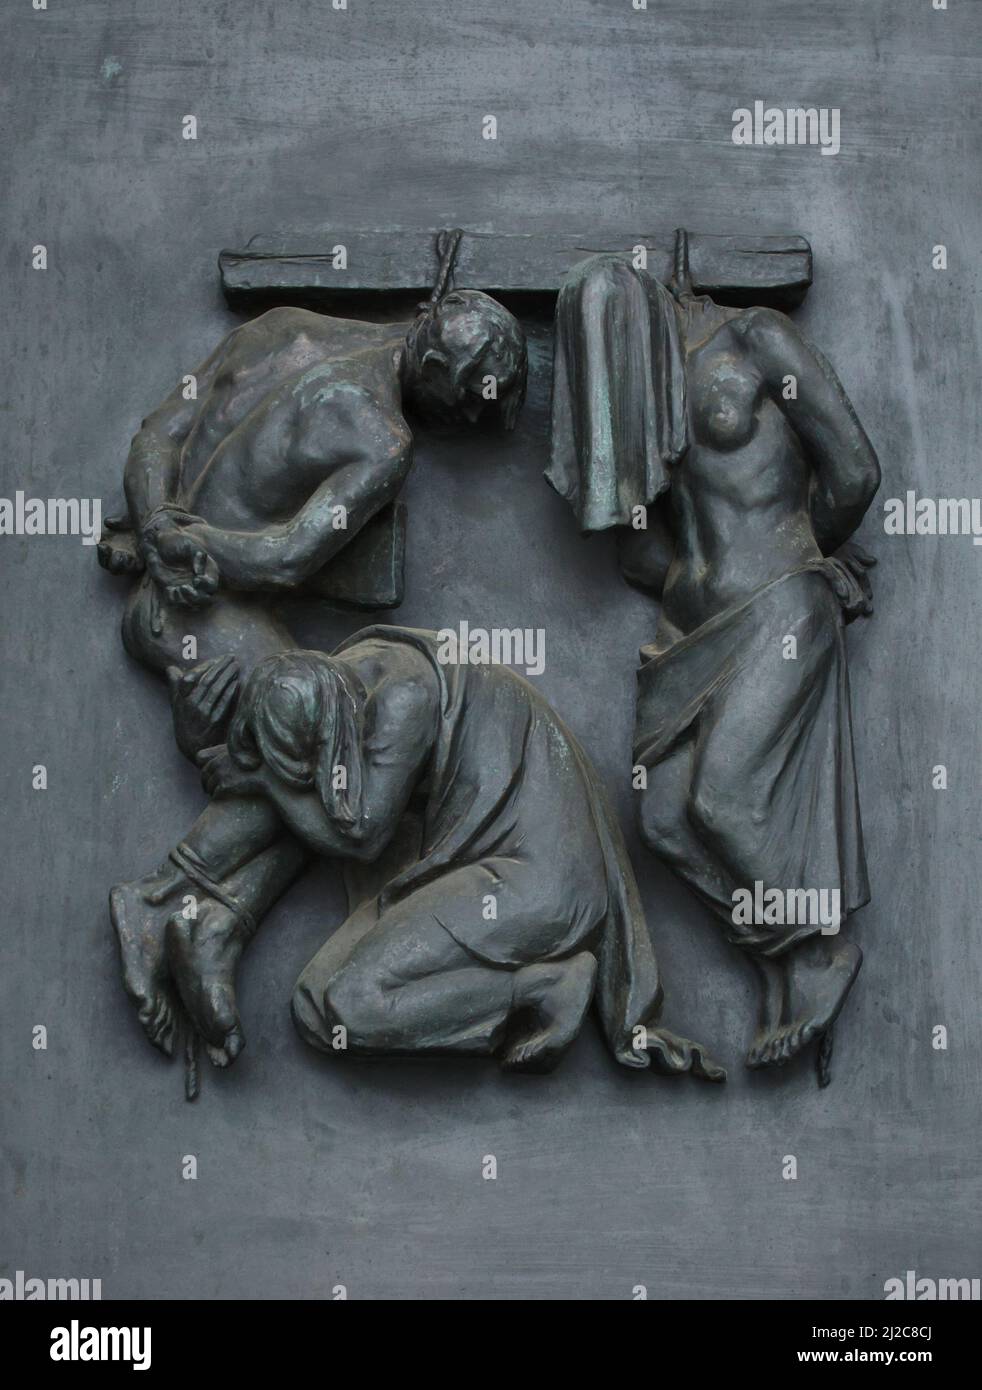 Slovak people executed by the Nazis during World War II depicted in the bronze relief by Slovak sculptor Rudolf Pribiš placed on the main door to the Slavín Memorial in Bratislava, Slovakia. The war memorial devoted to Red Army soldiers fallen during World War II was designed by Slovak architect Ján Svetlík and build between 1957 and 1960. Stock Photo